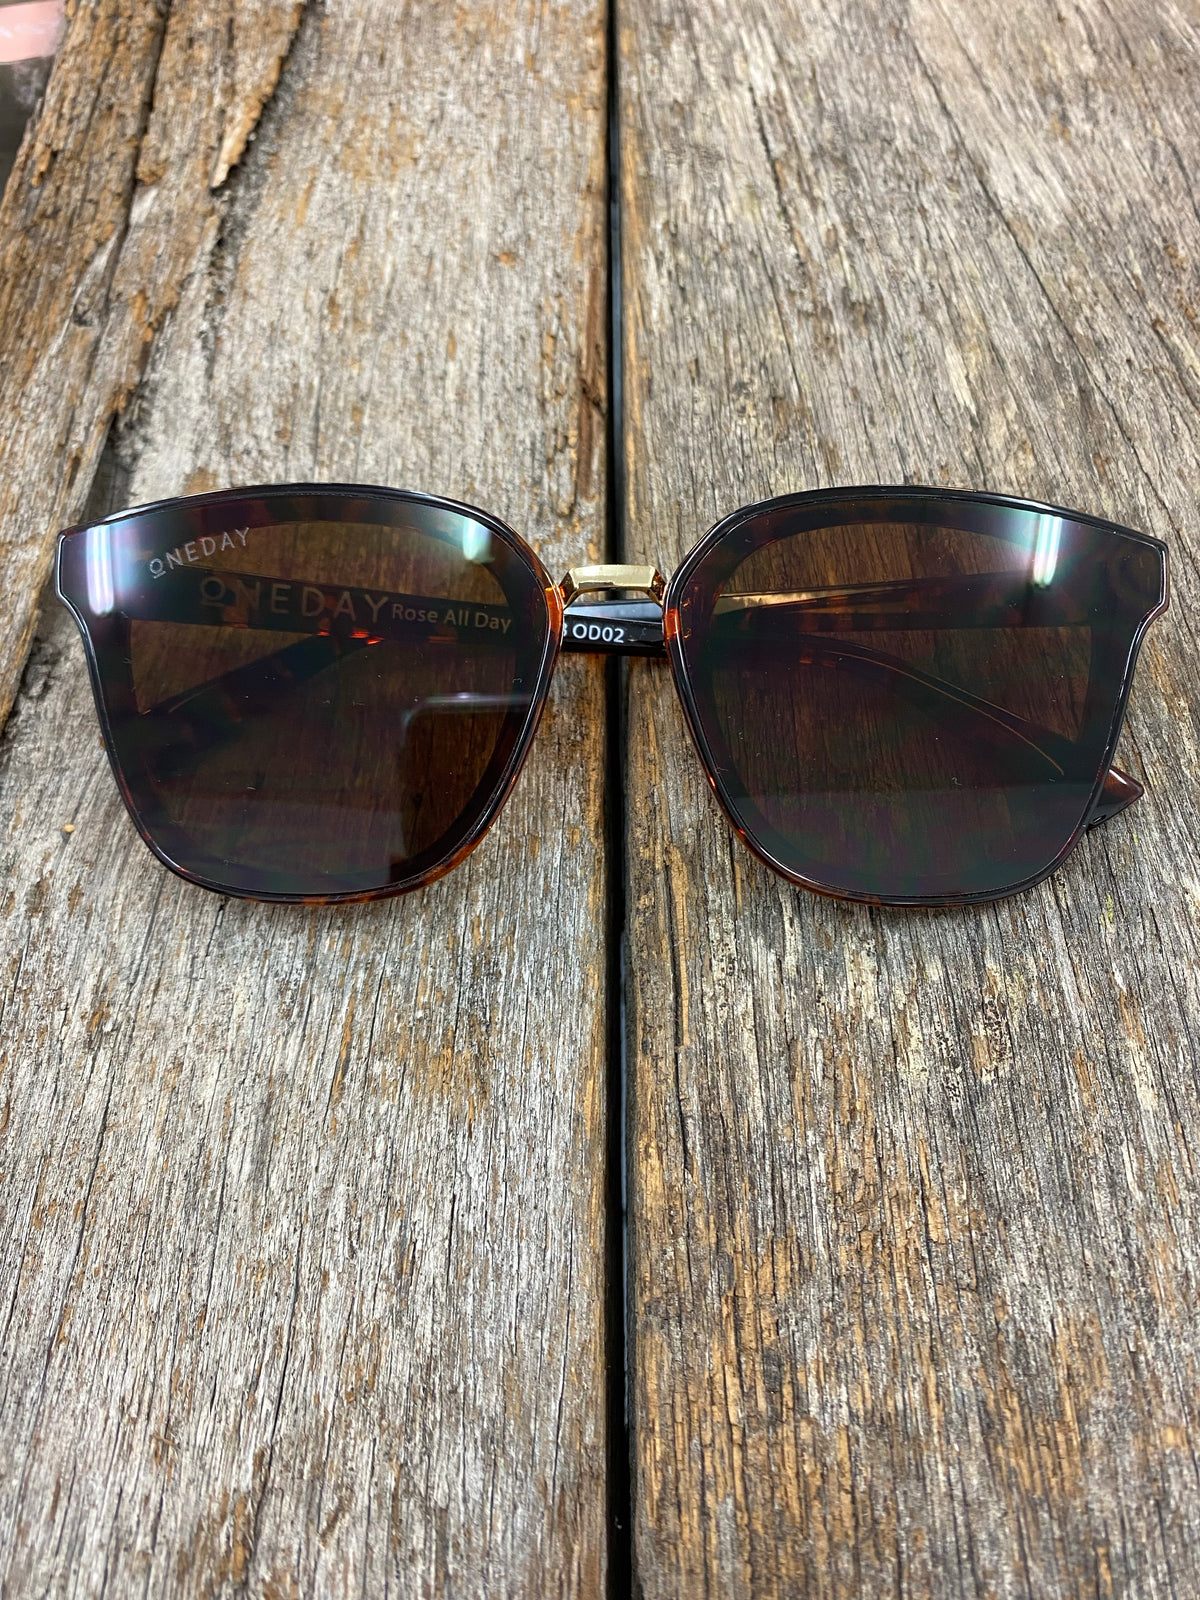 Rose' all Day Sunglasses - Tort and Brown